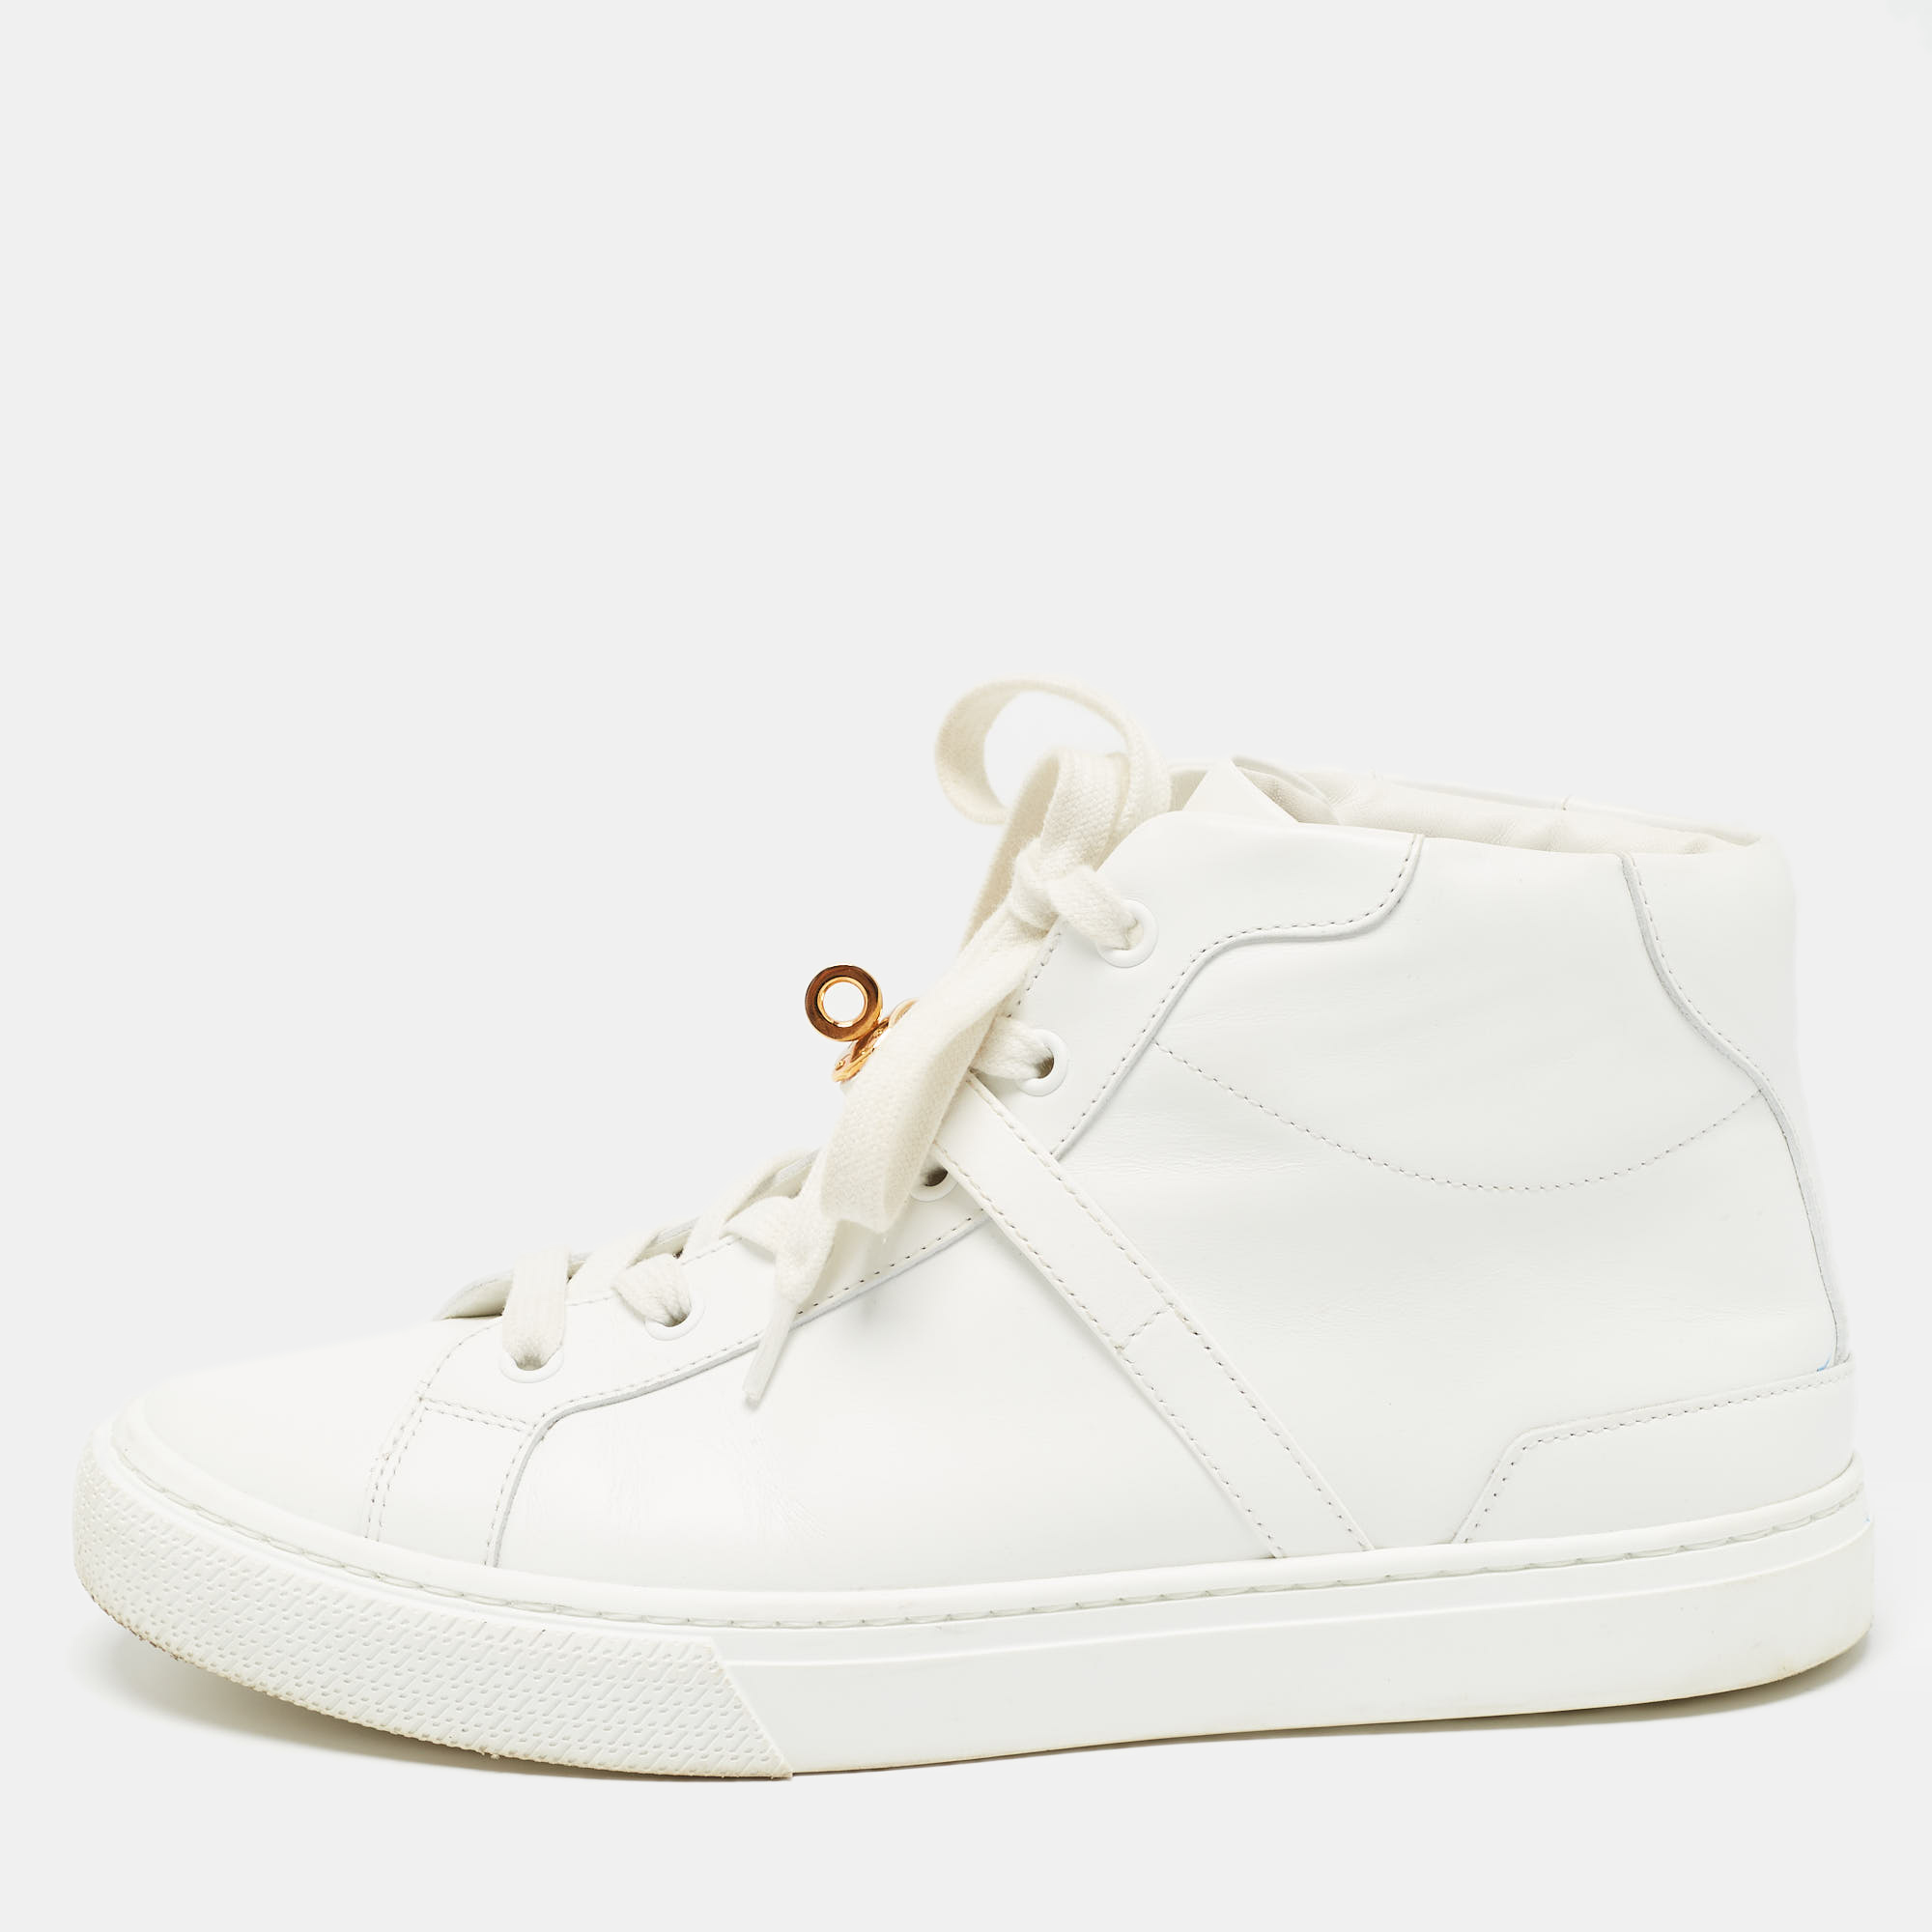 Hermes white leather daydream high top sneakers size 39